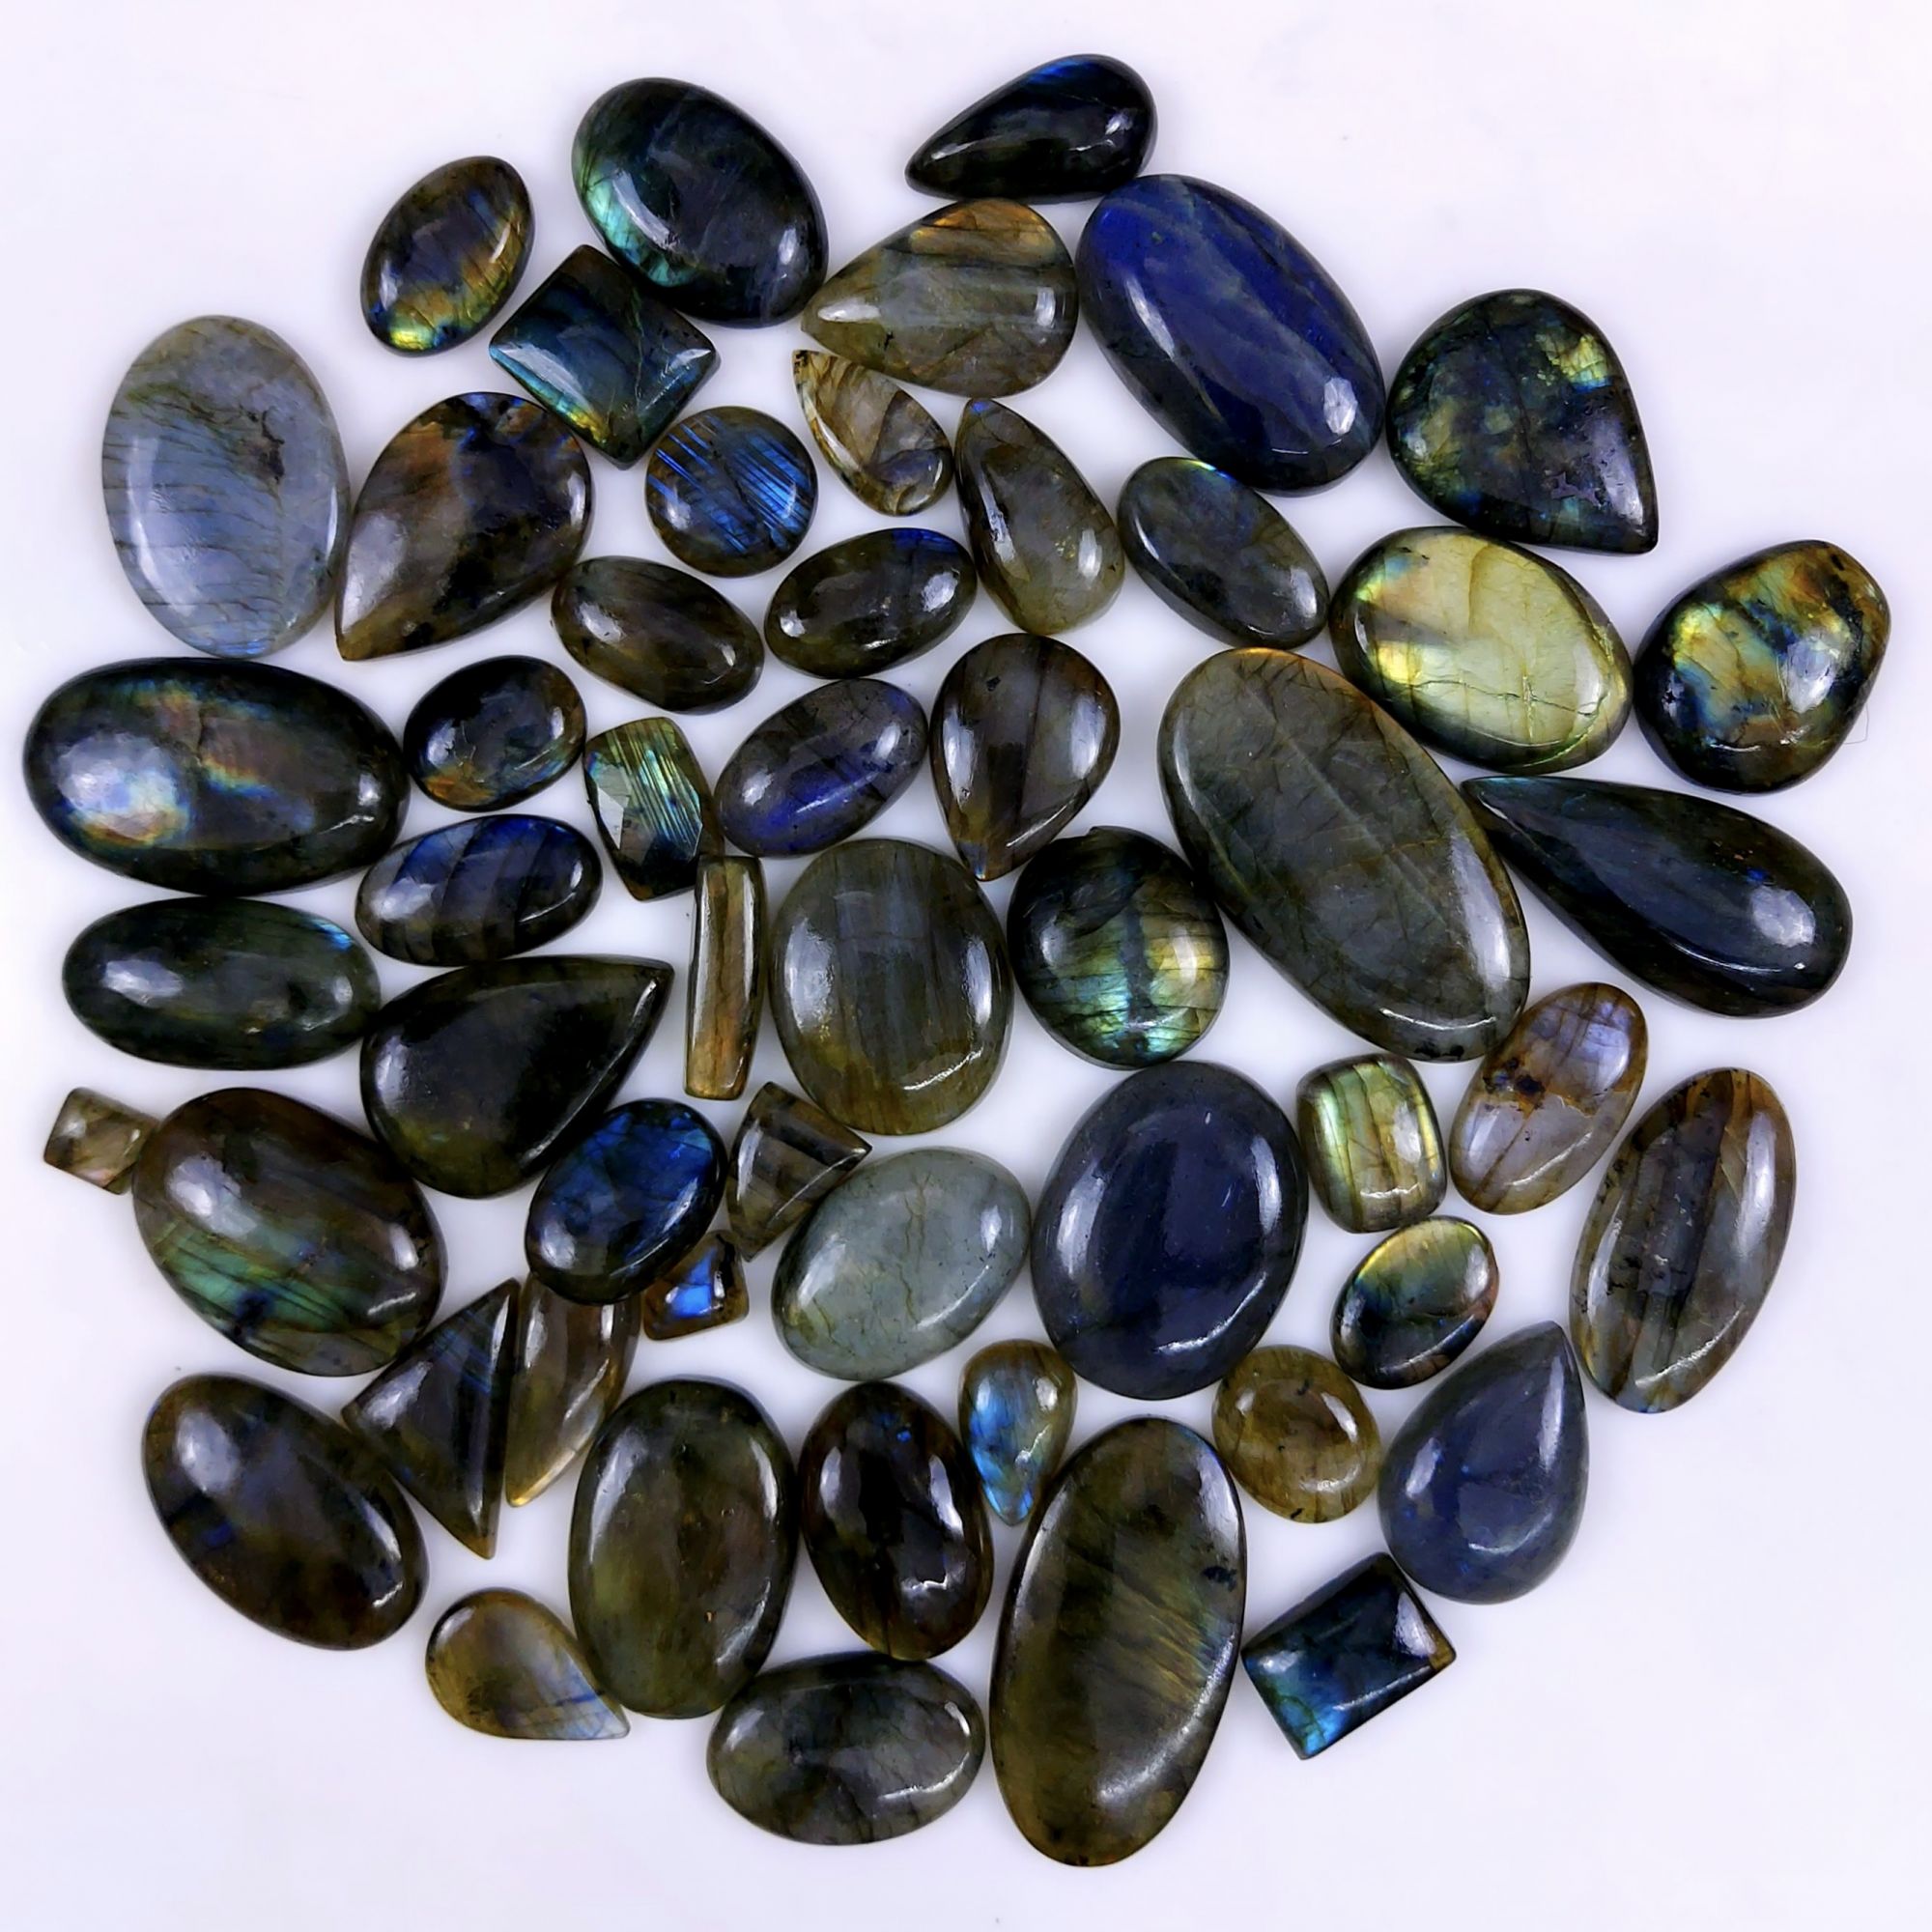 42pc 1684Cts Labradorite Cabochon Multifire Healing Crystal For Jewelry Supplies, Labradorite Necklace Handmade Wire Wrapped Gemstone Pendant 50x28 18x12mm#6338